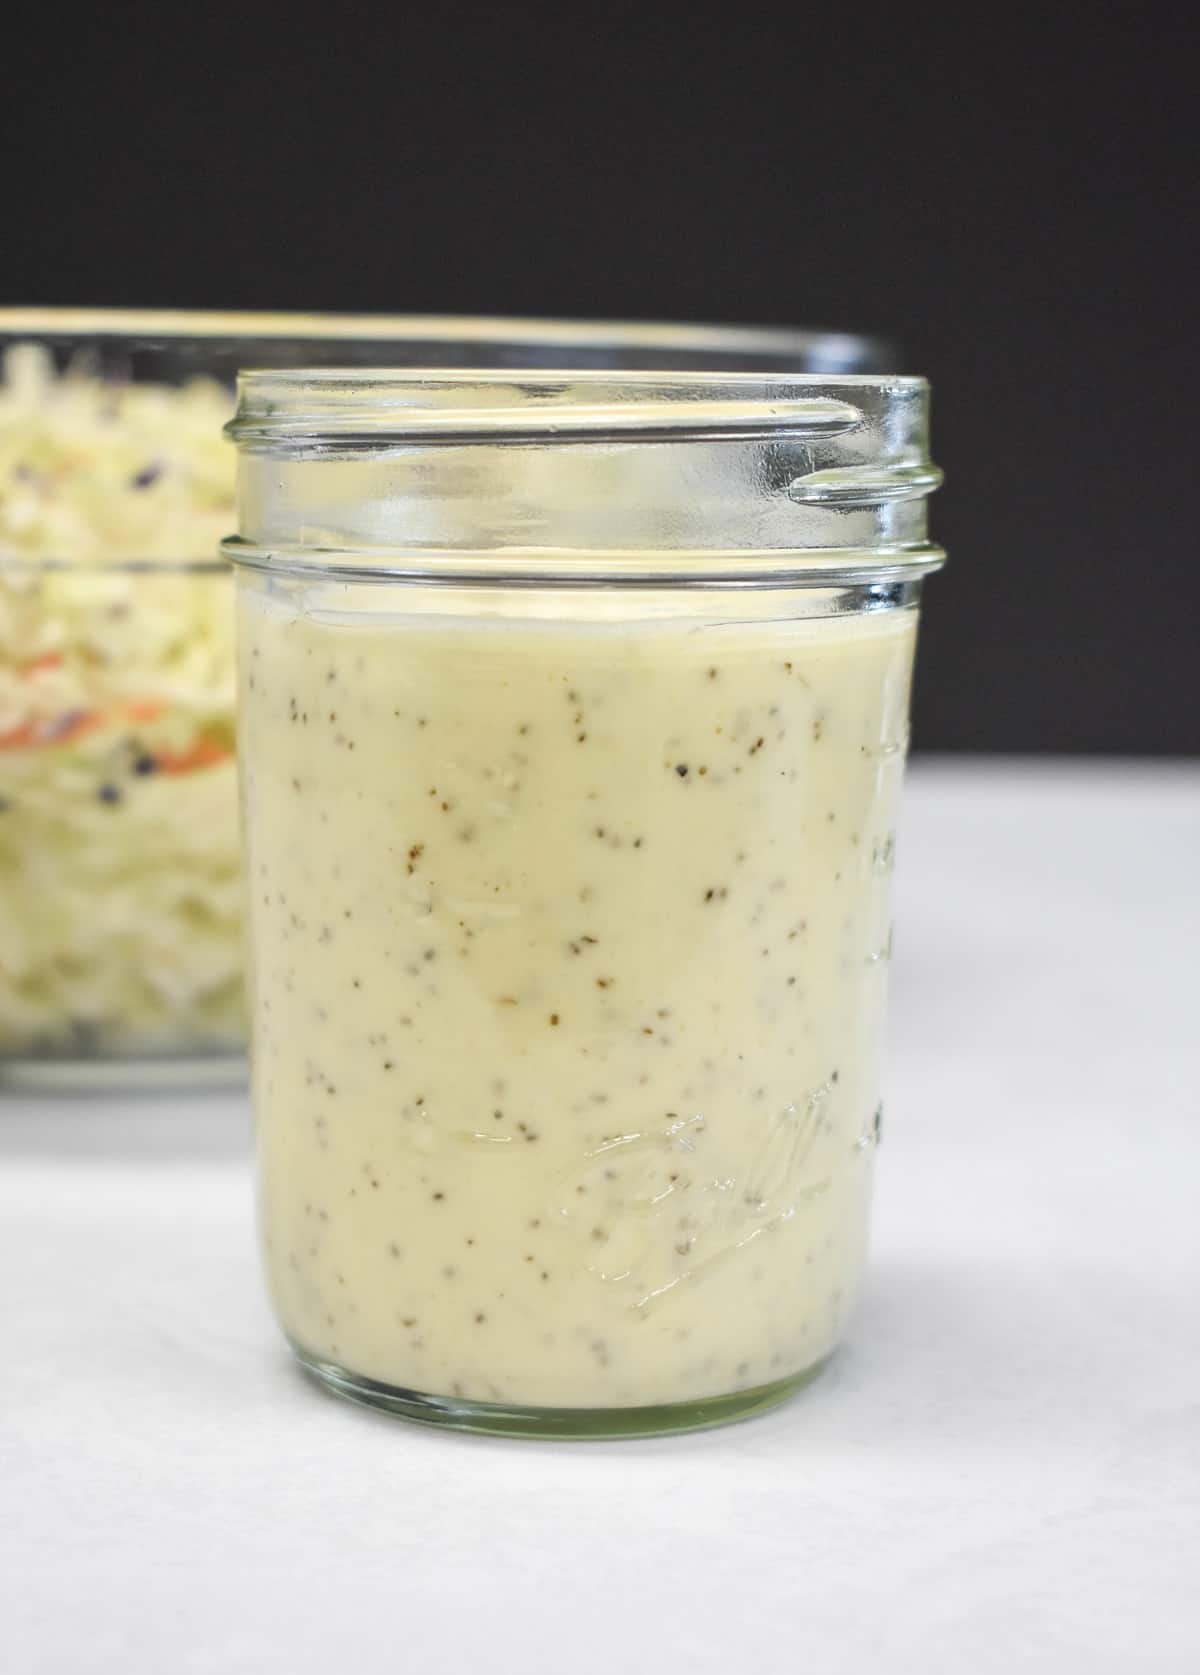 An image of the coleslaw dressing in a canning jar with a bowl of the cabbage in the background.